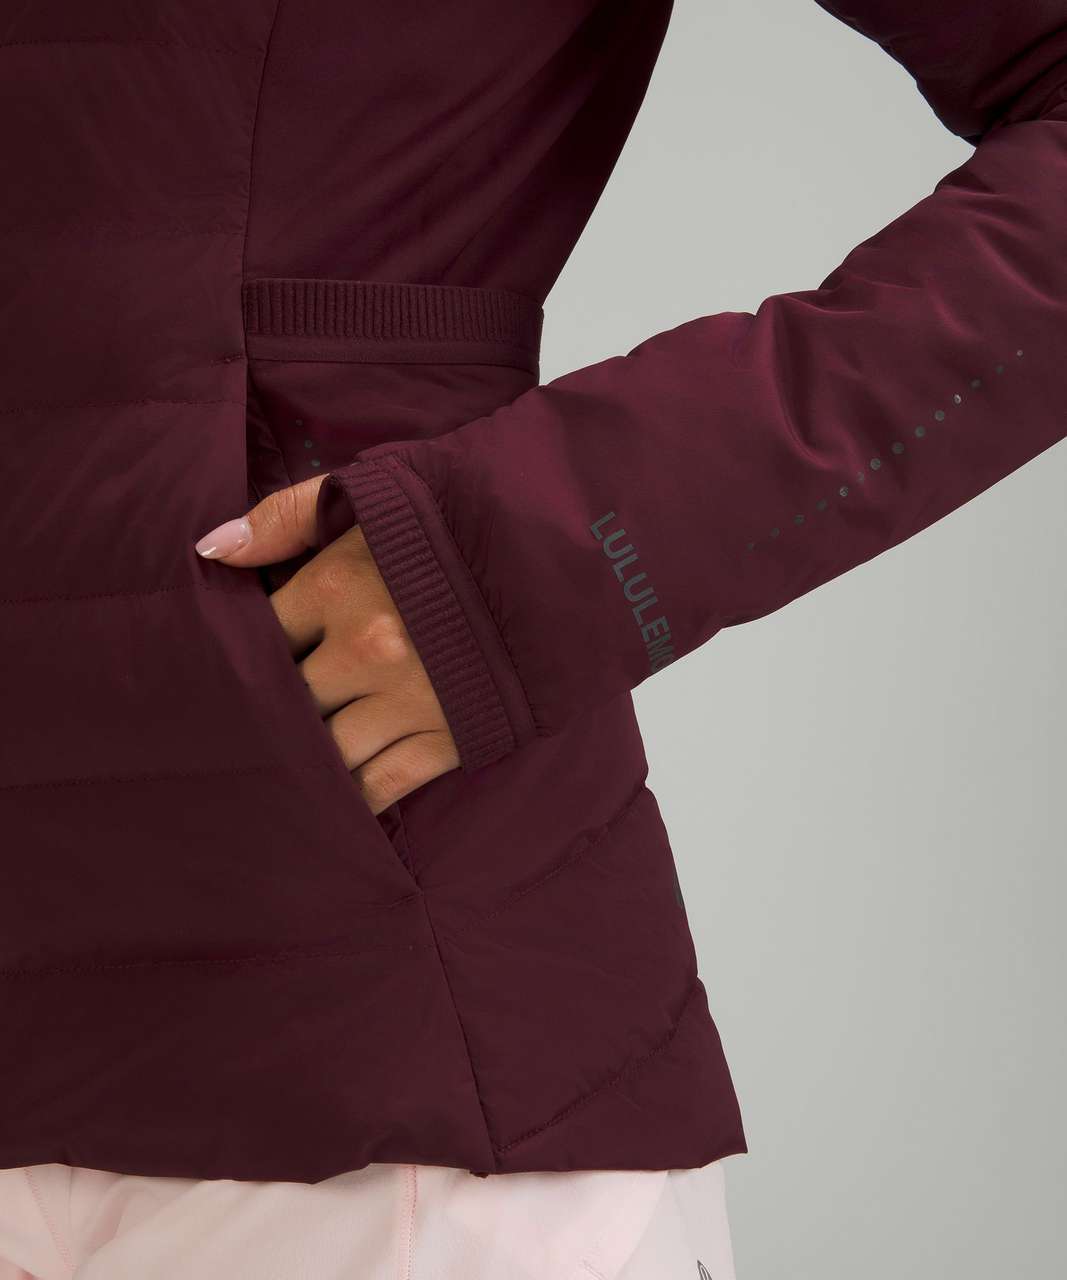 Lululemon Down for It All Jacket - Cassis (Second Release)